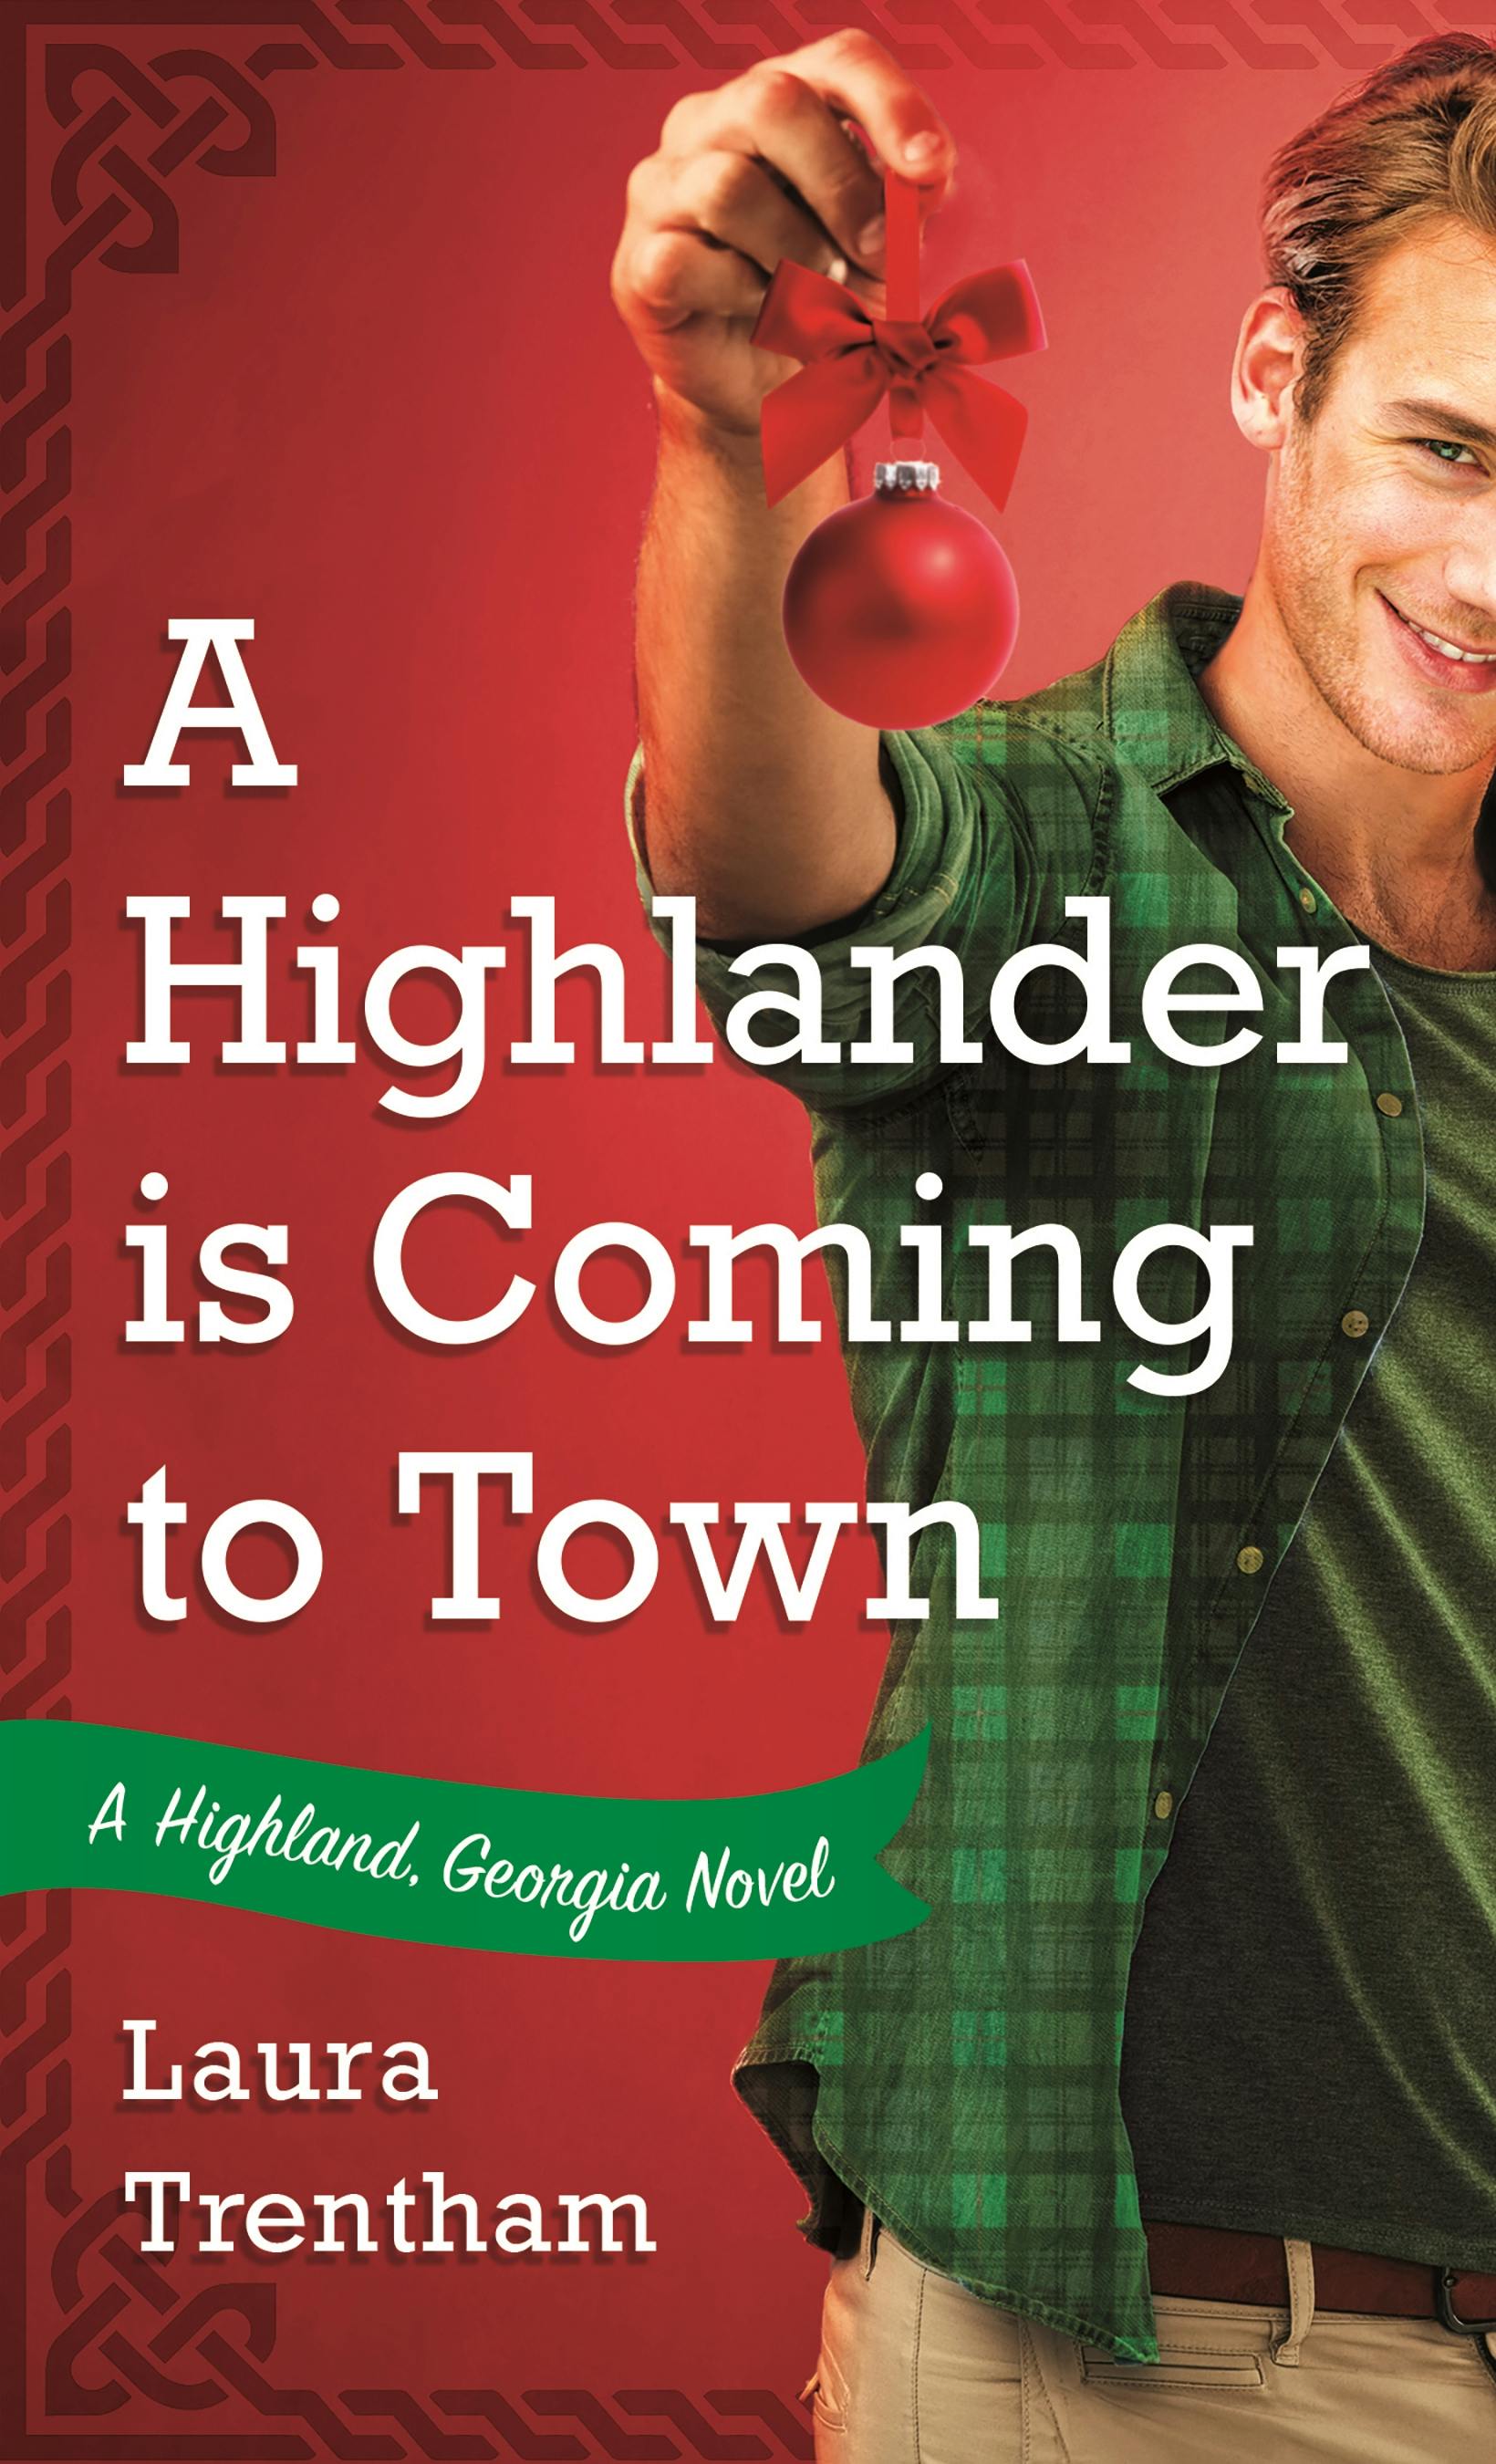 Image of A Highlander is Coming to Town